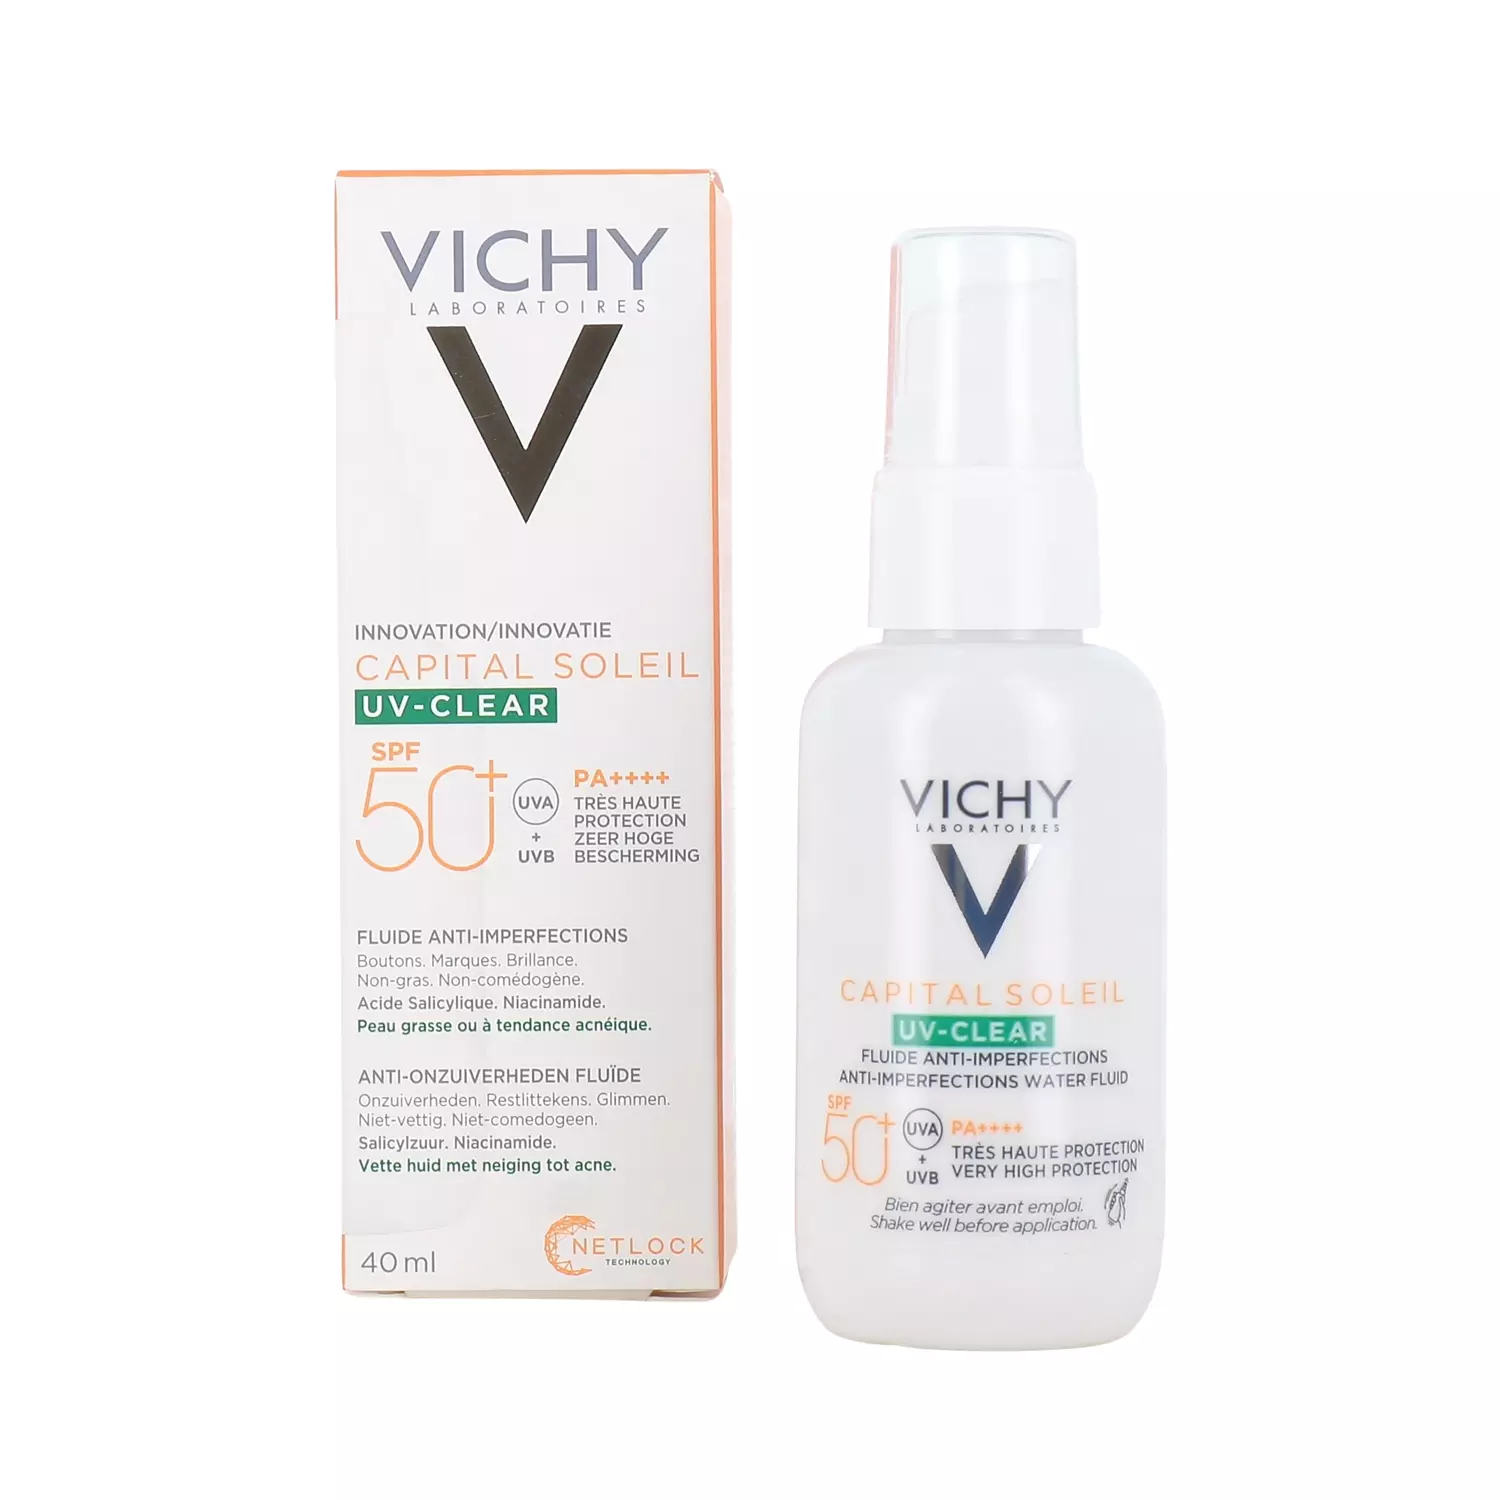 VICHY CAPITAL SOLEIL UV-CLEAR FLUIDE ANTI-IMPERFECTIONS SPF50+ 40ML